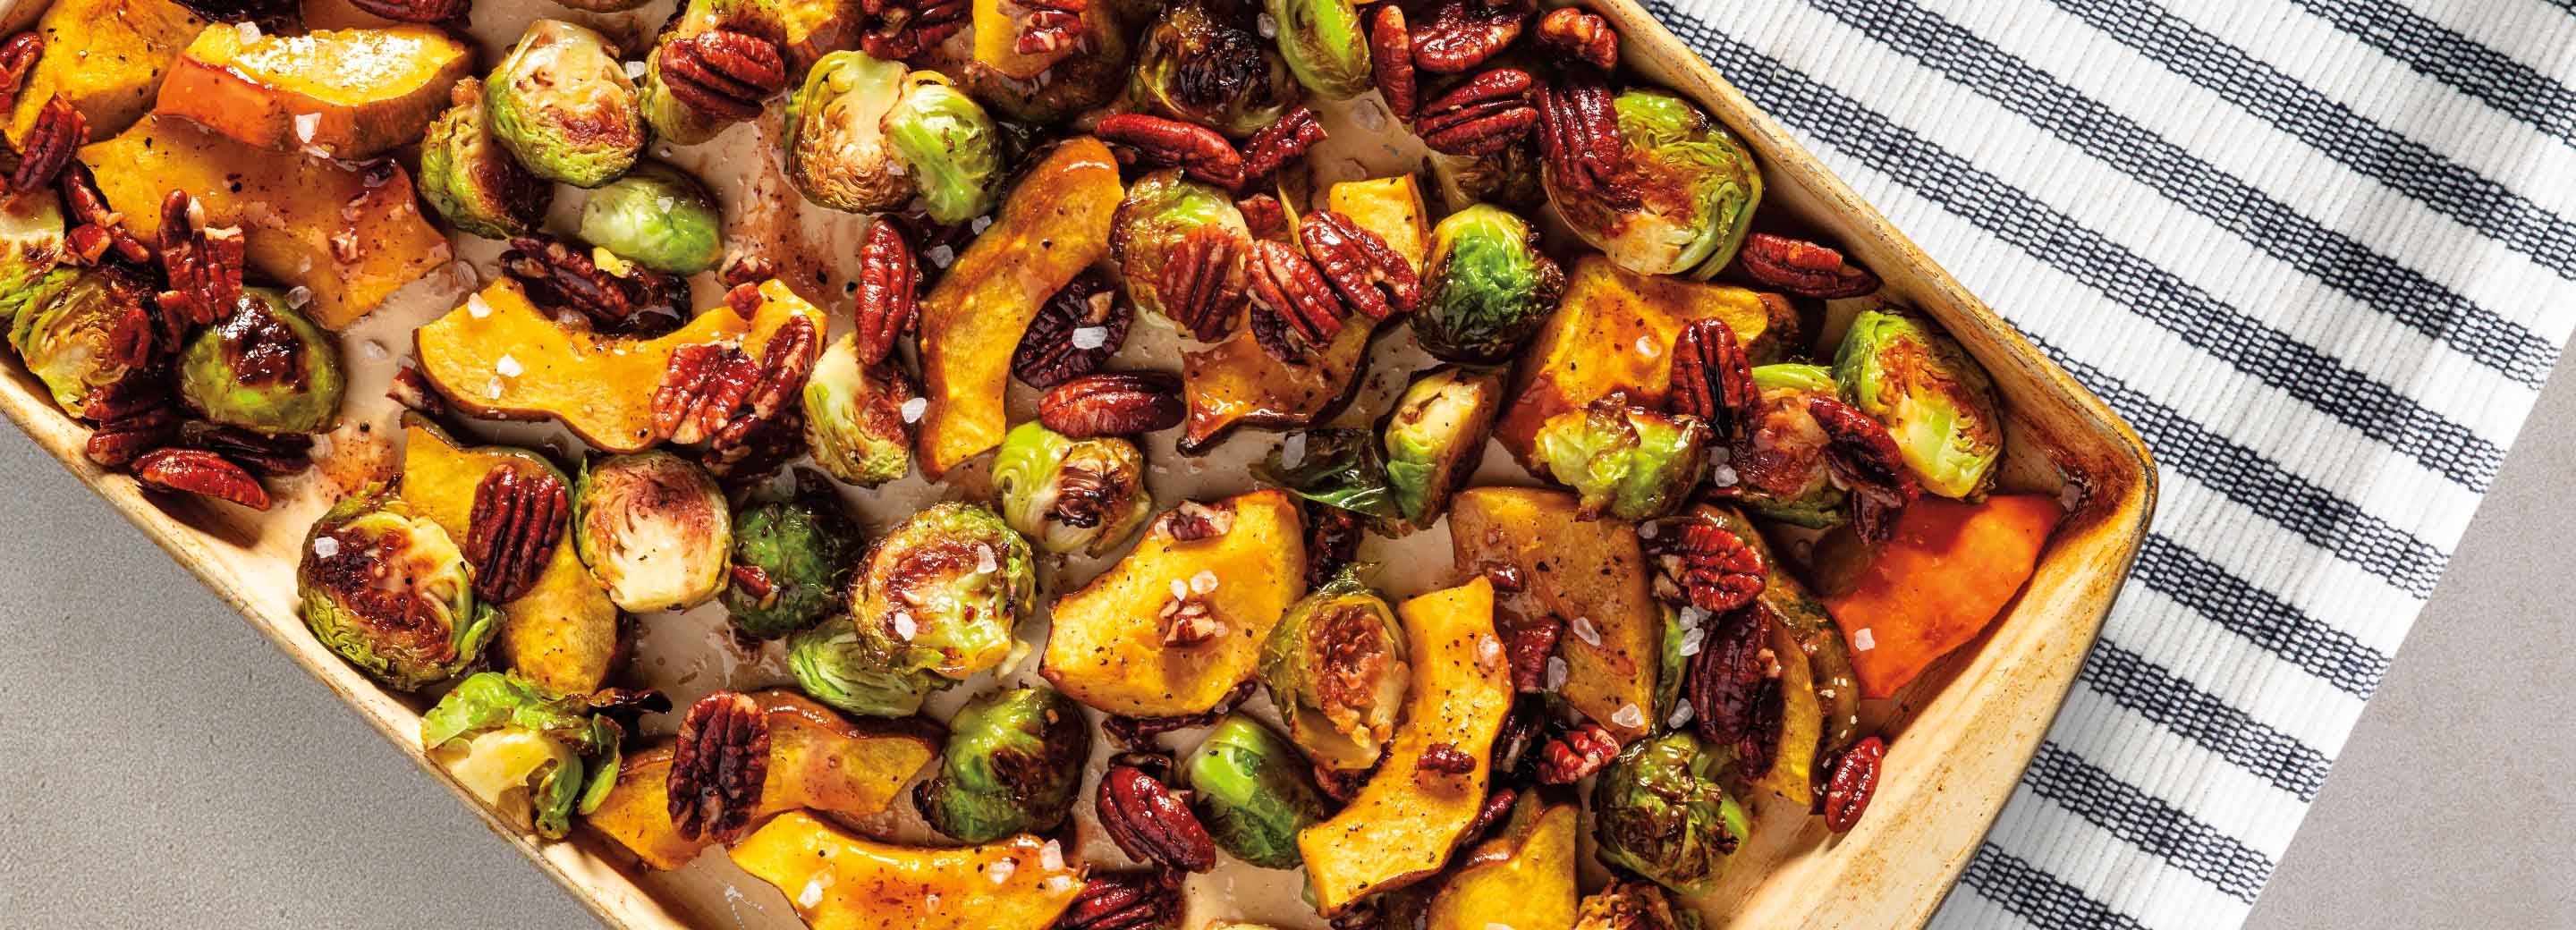 Maple Roasted Squash & Brussels Sprouts